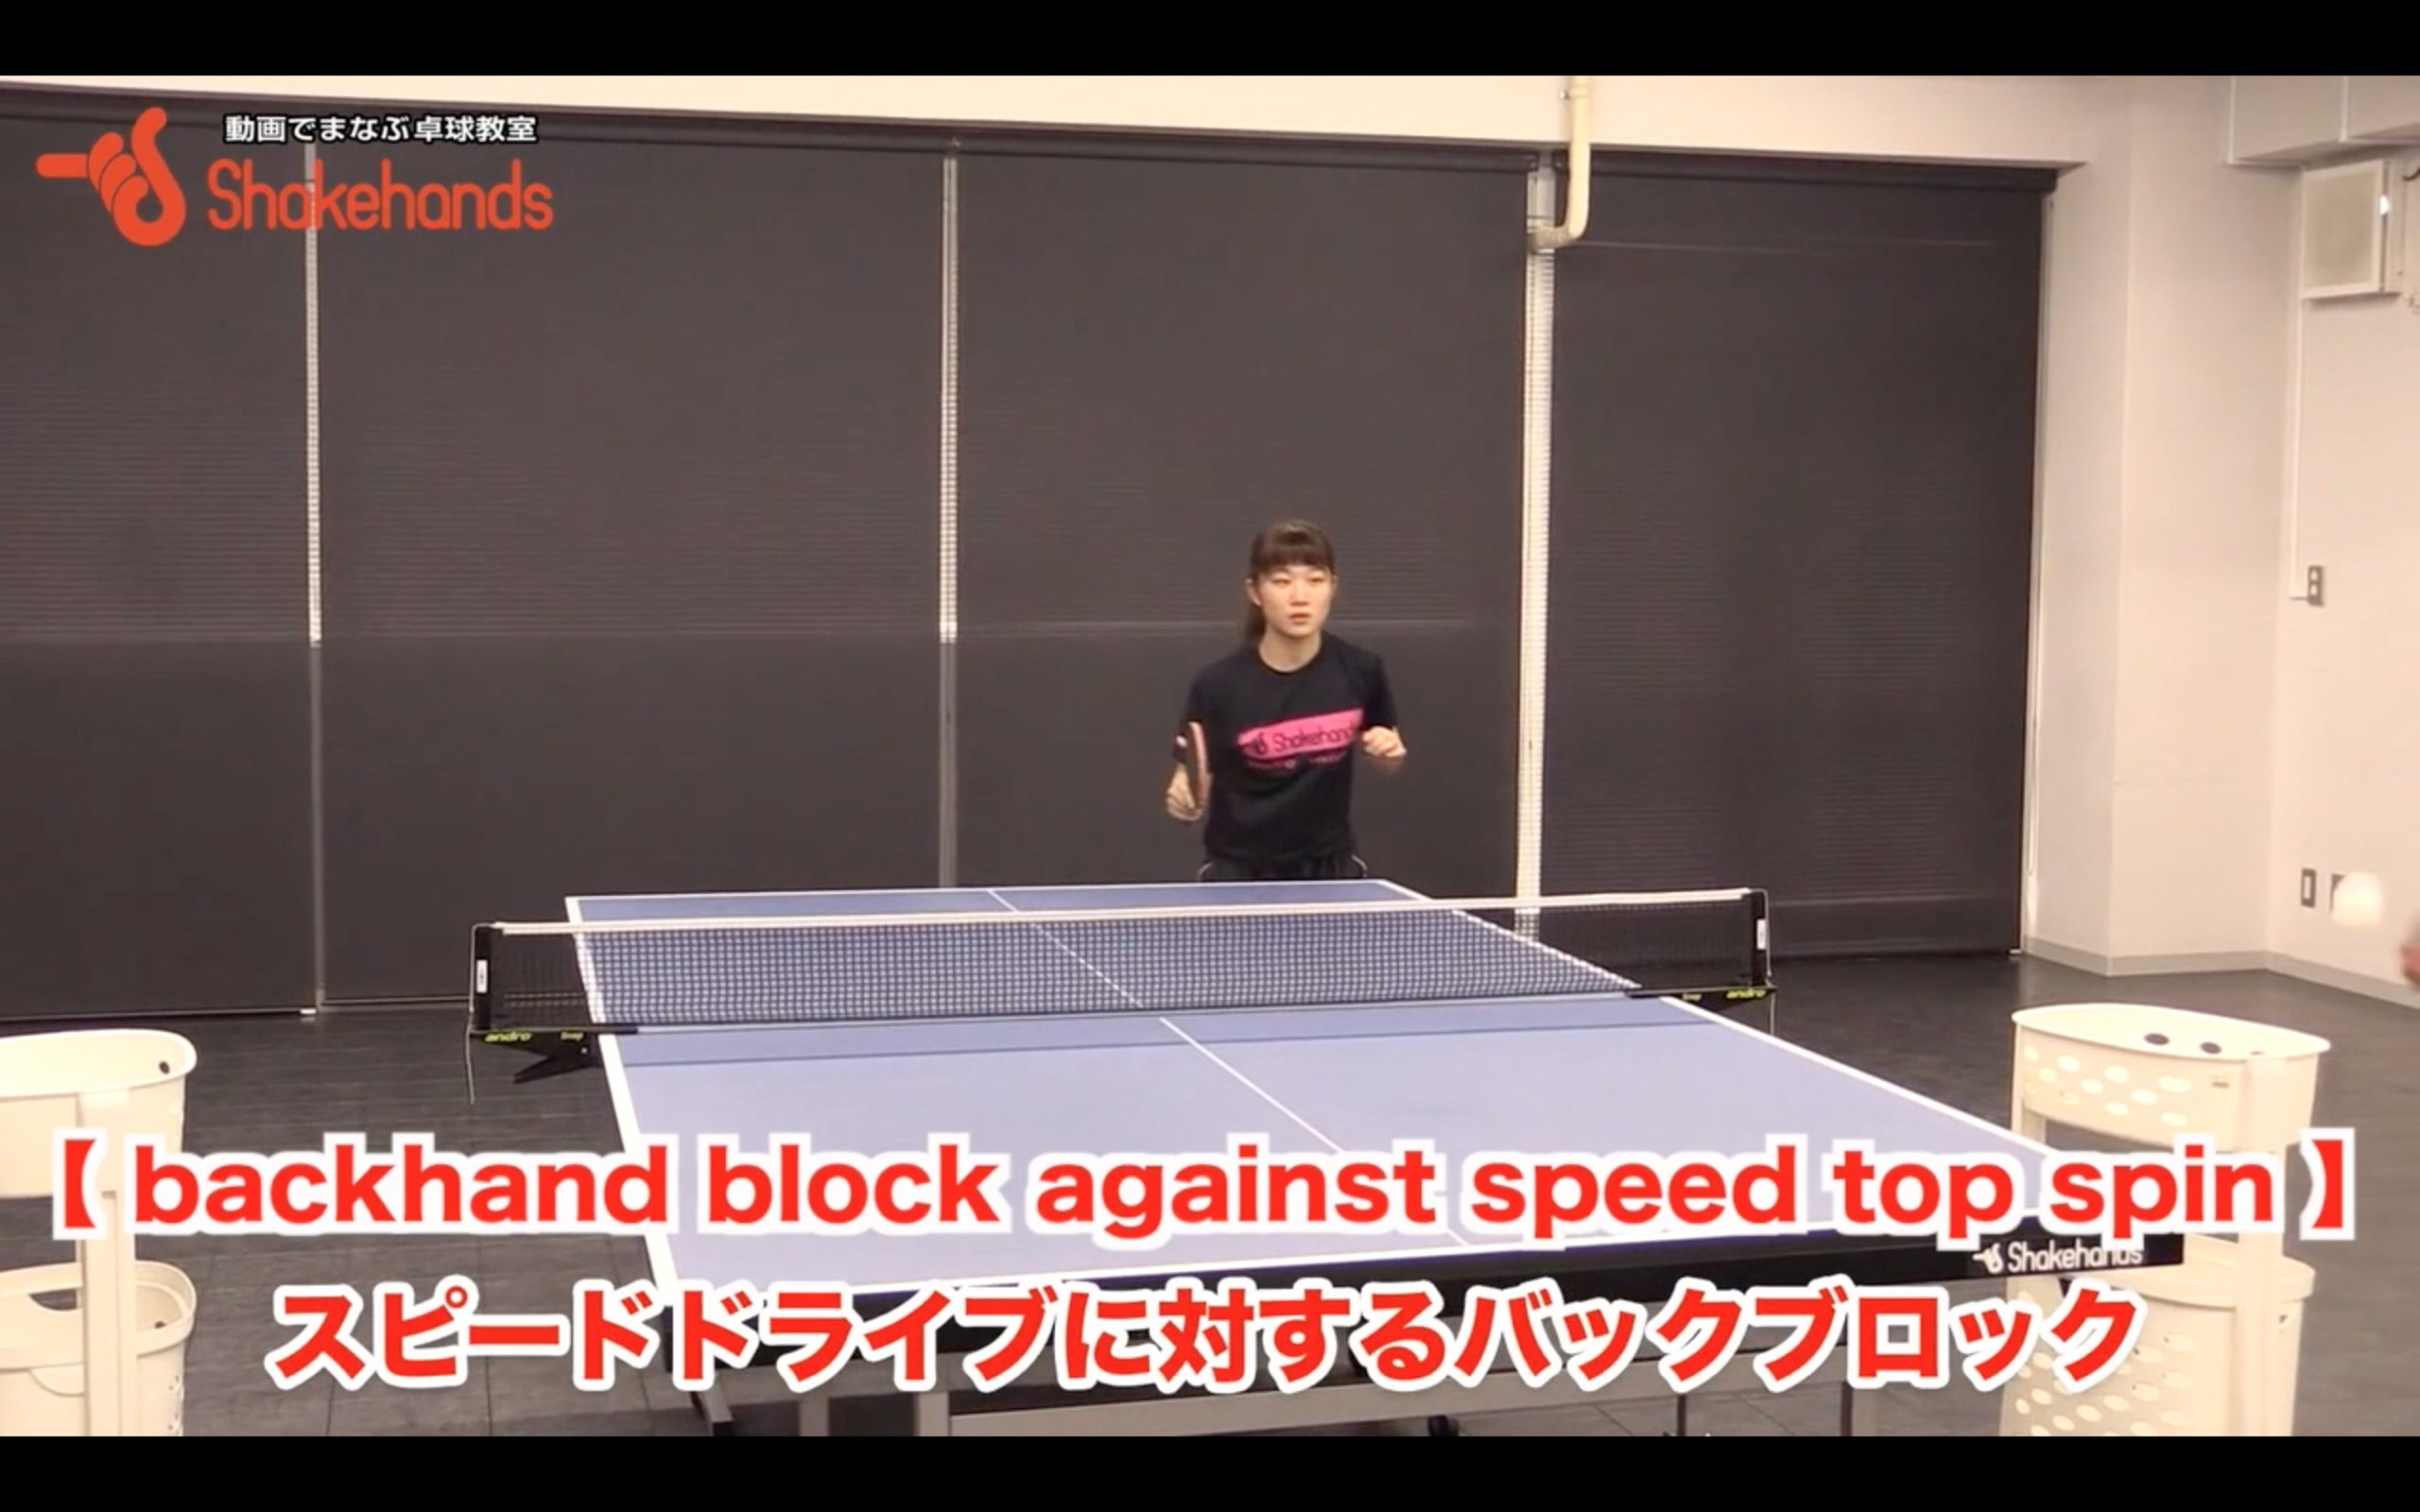 Backhand block against speed top sipin